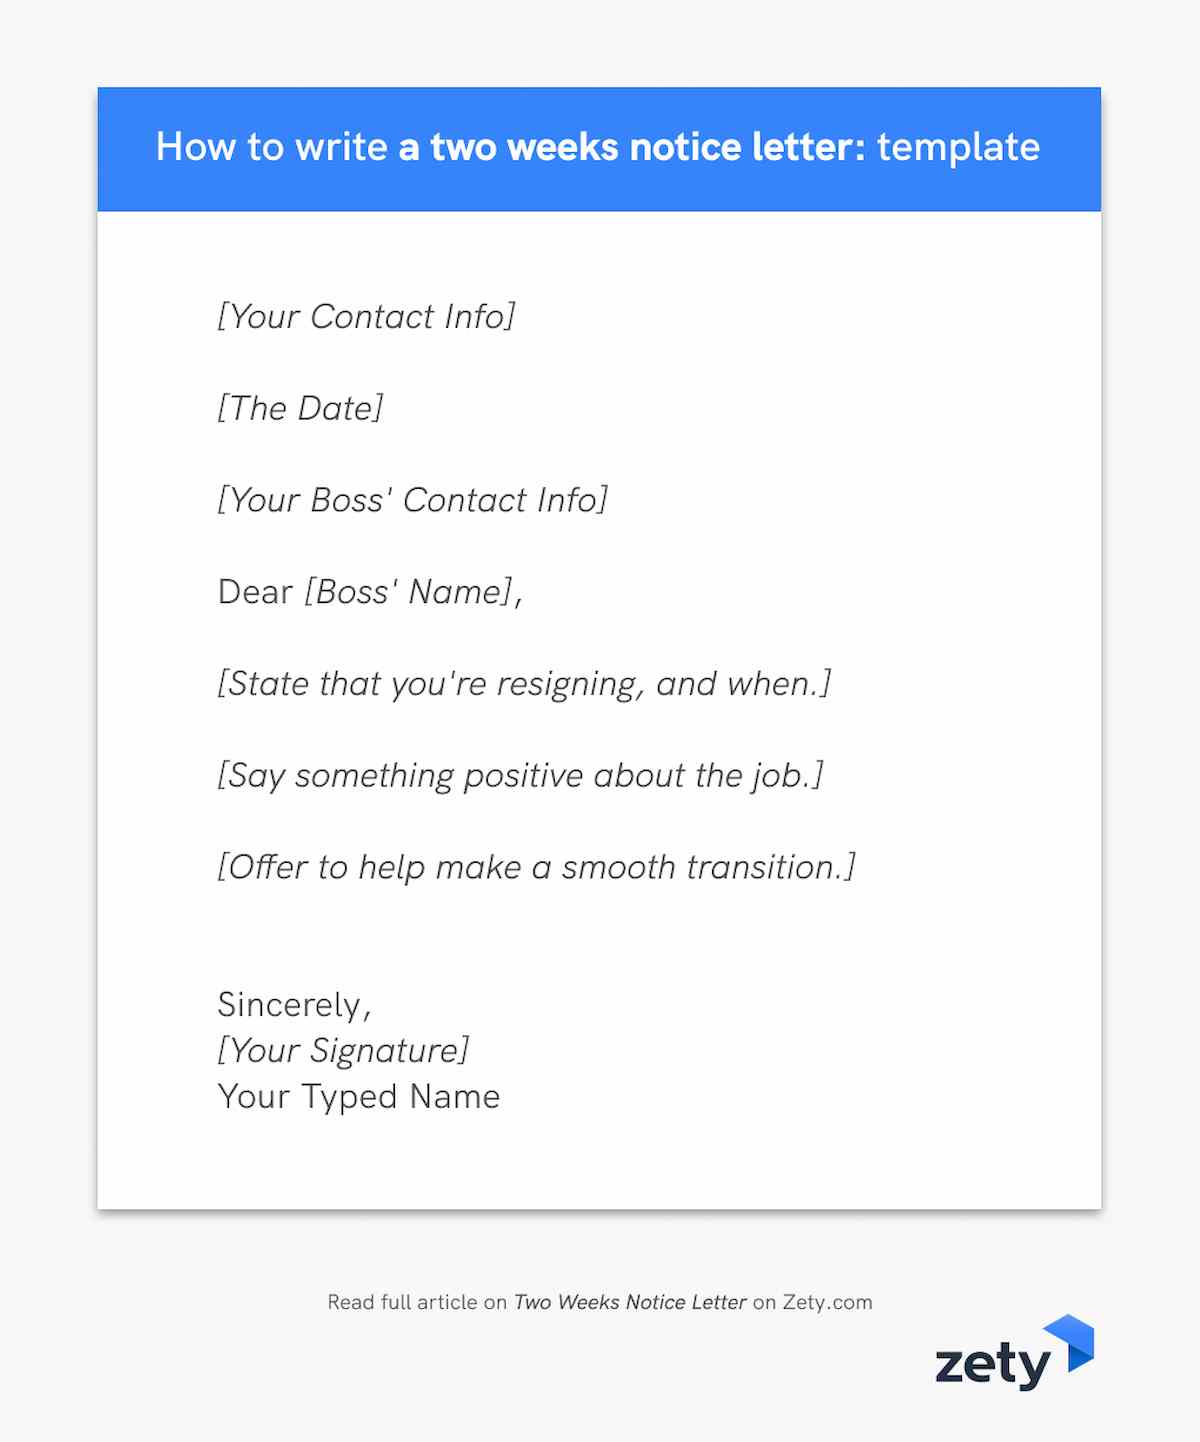 Two Weeks Notice Letter (Template and Writing Guide)